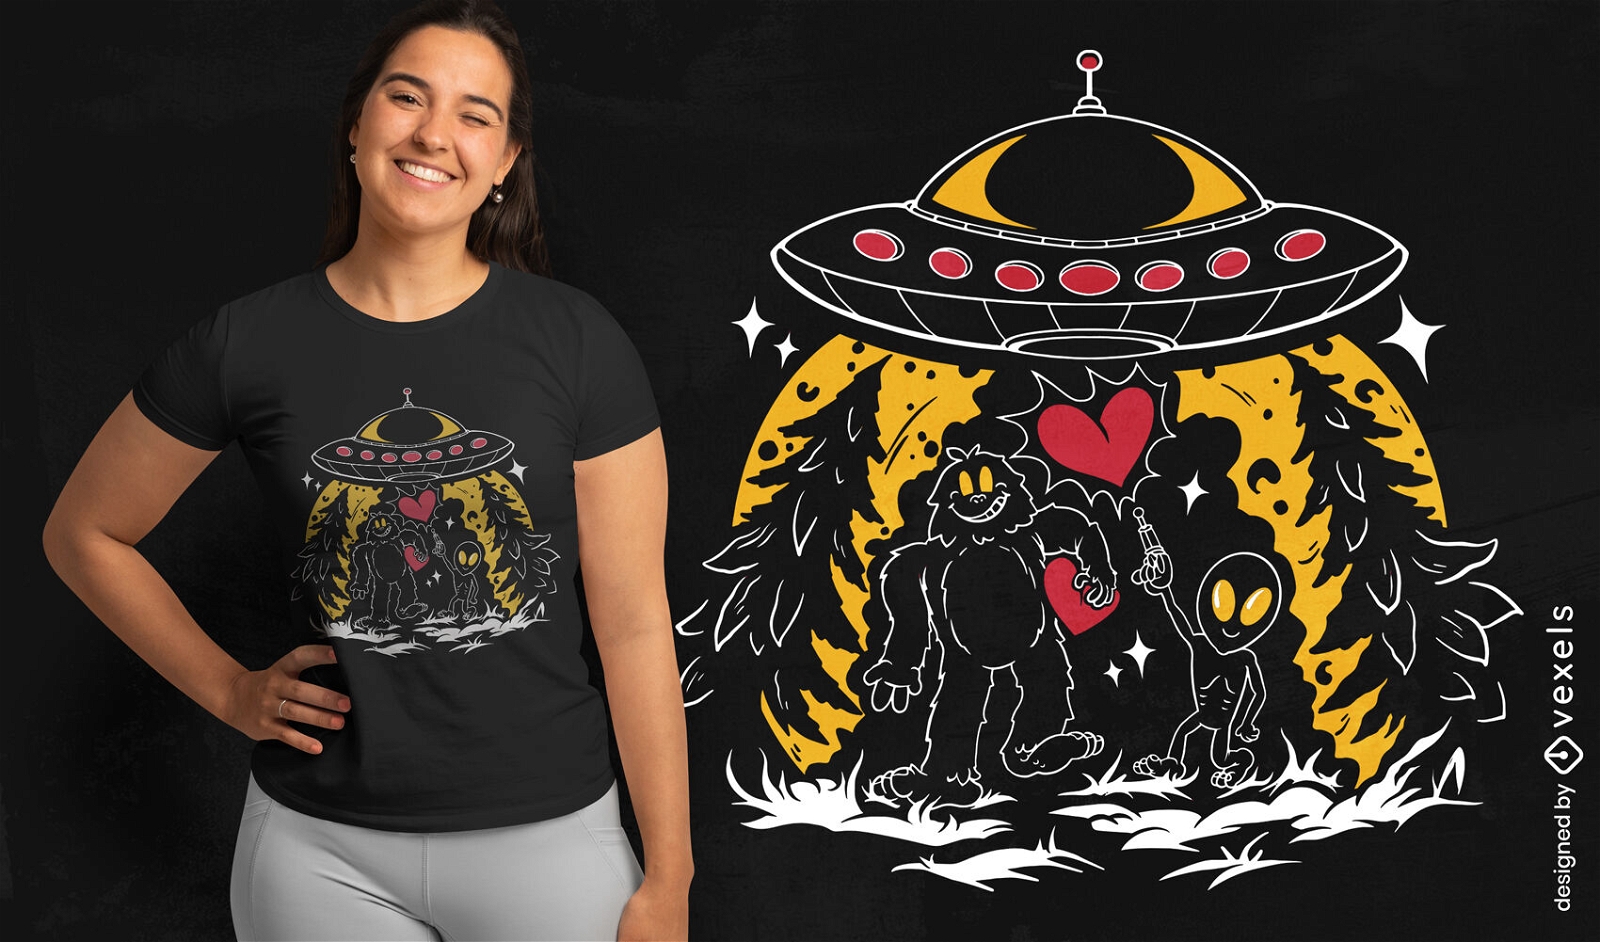 Alien and big foot with spaceship t-shirt design